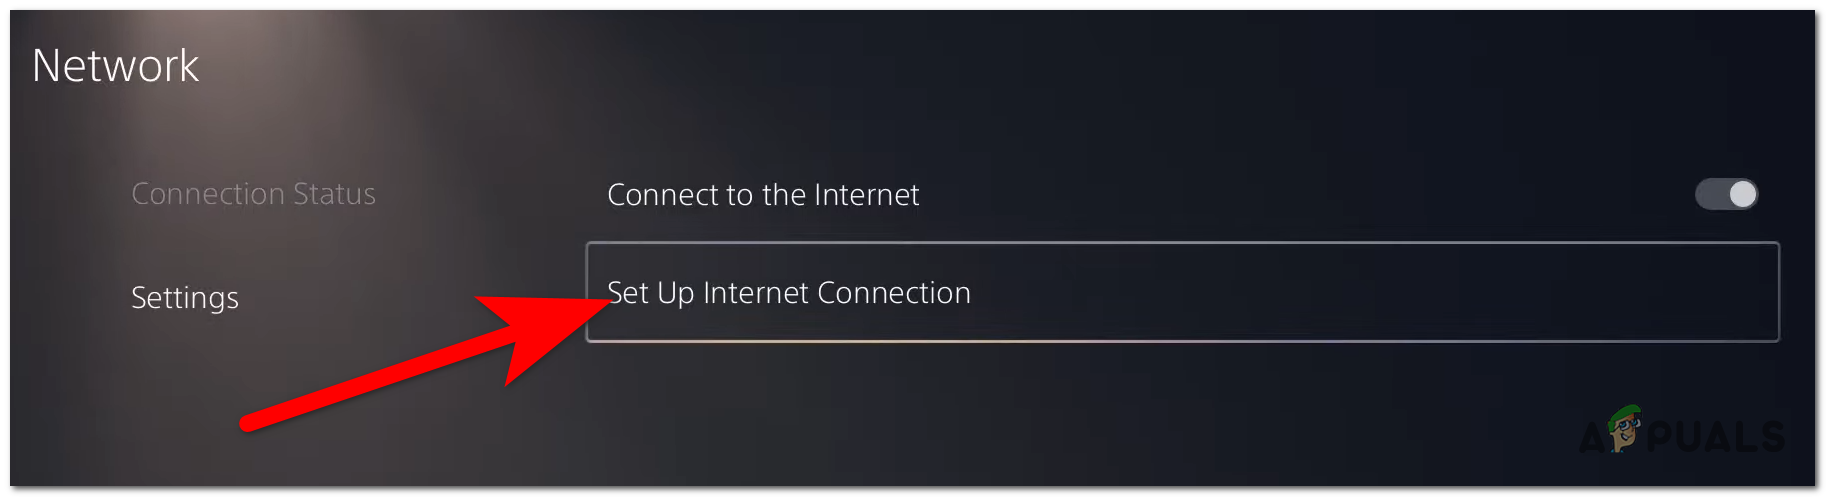 Setting up a new internet connection